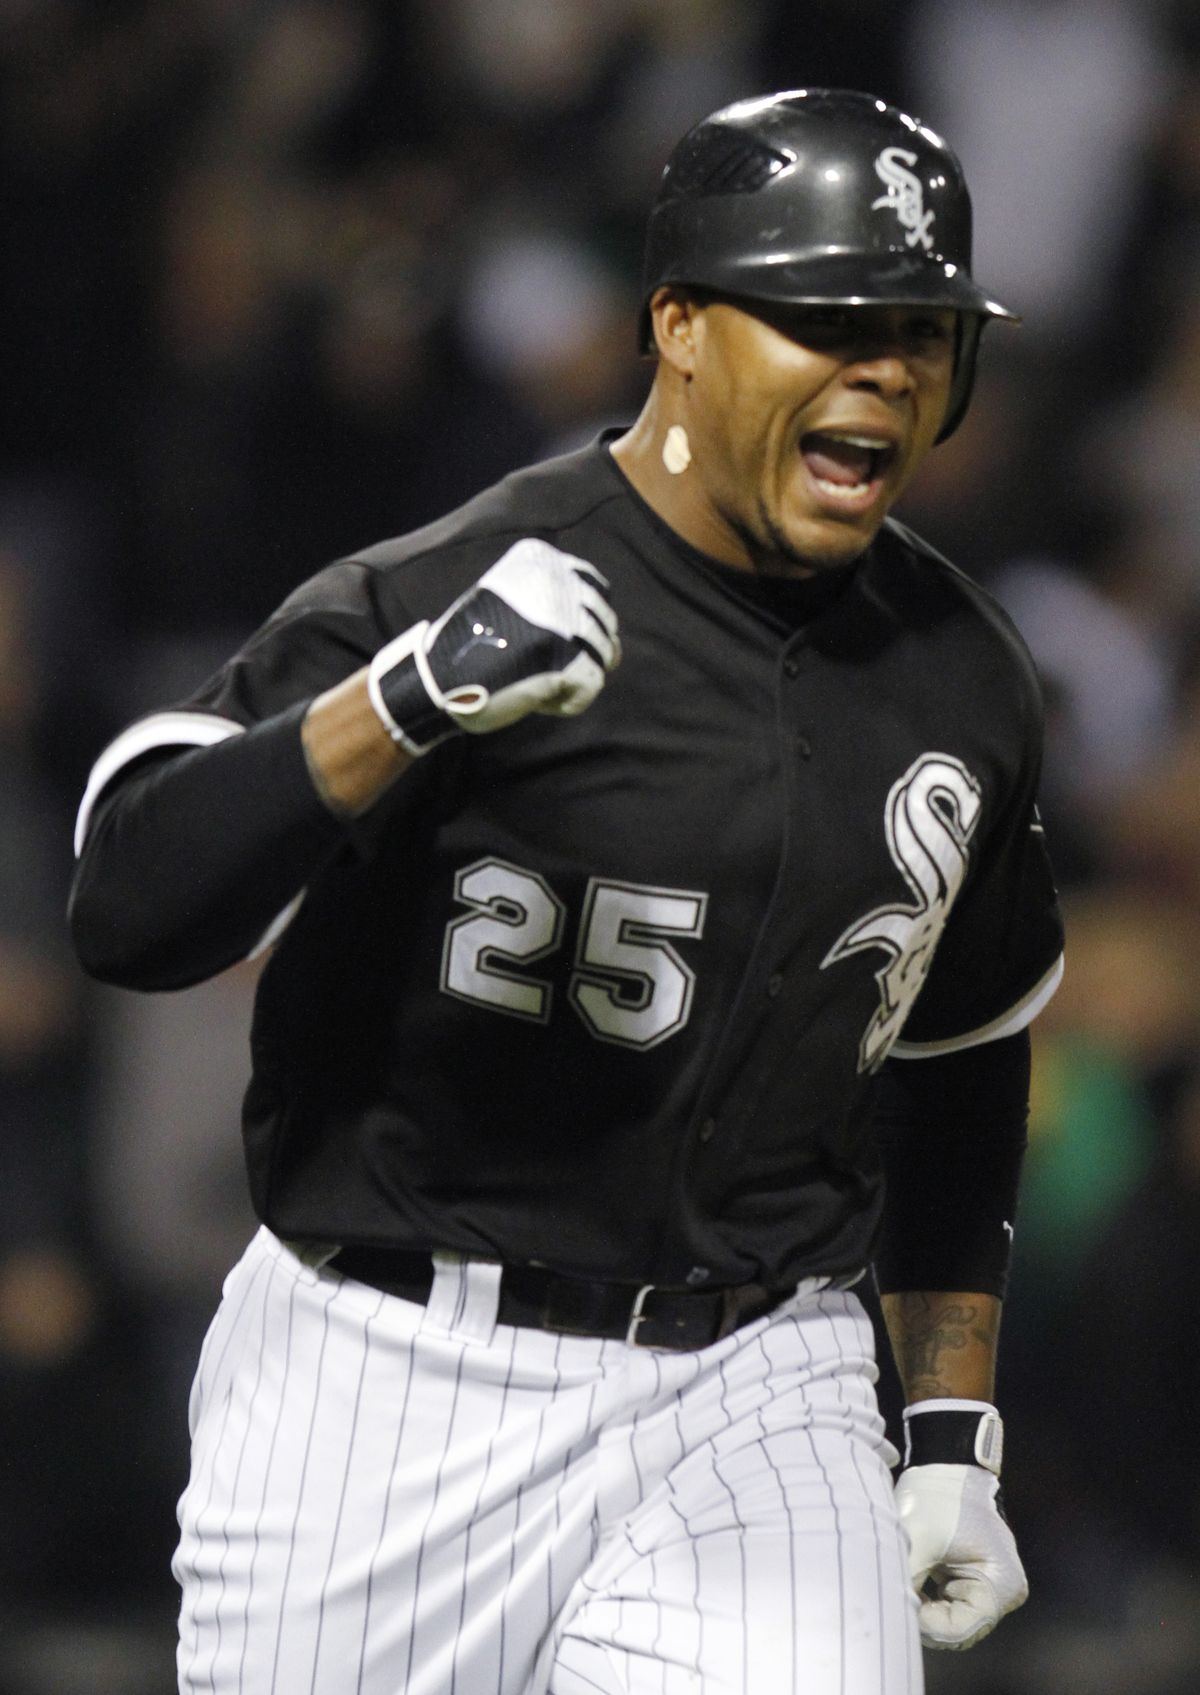 Andruw Jones celebrates as he rounds the bases after his game-winning solo home run for Chicago.  (Associated Press)